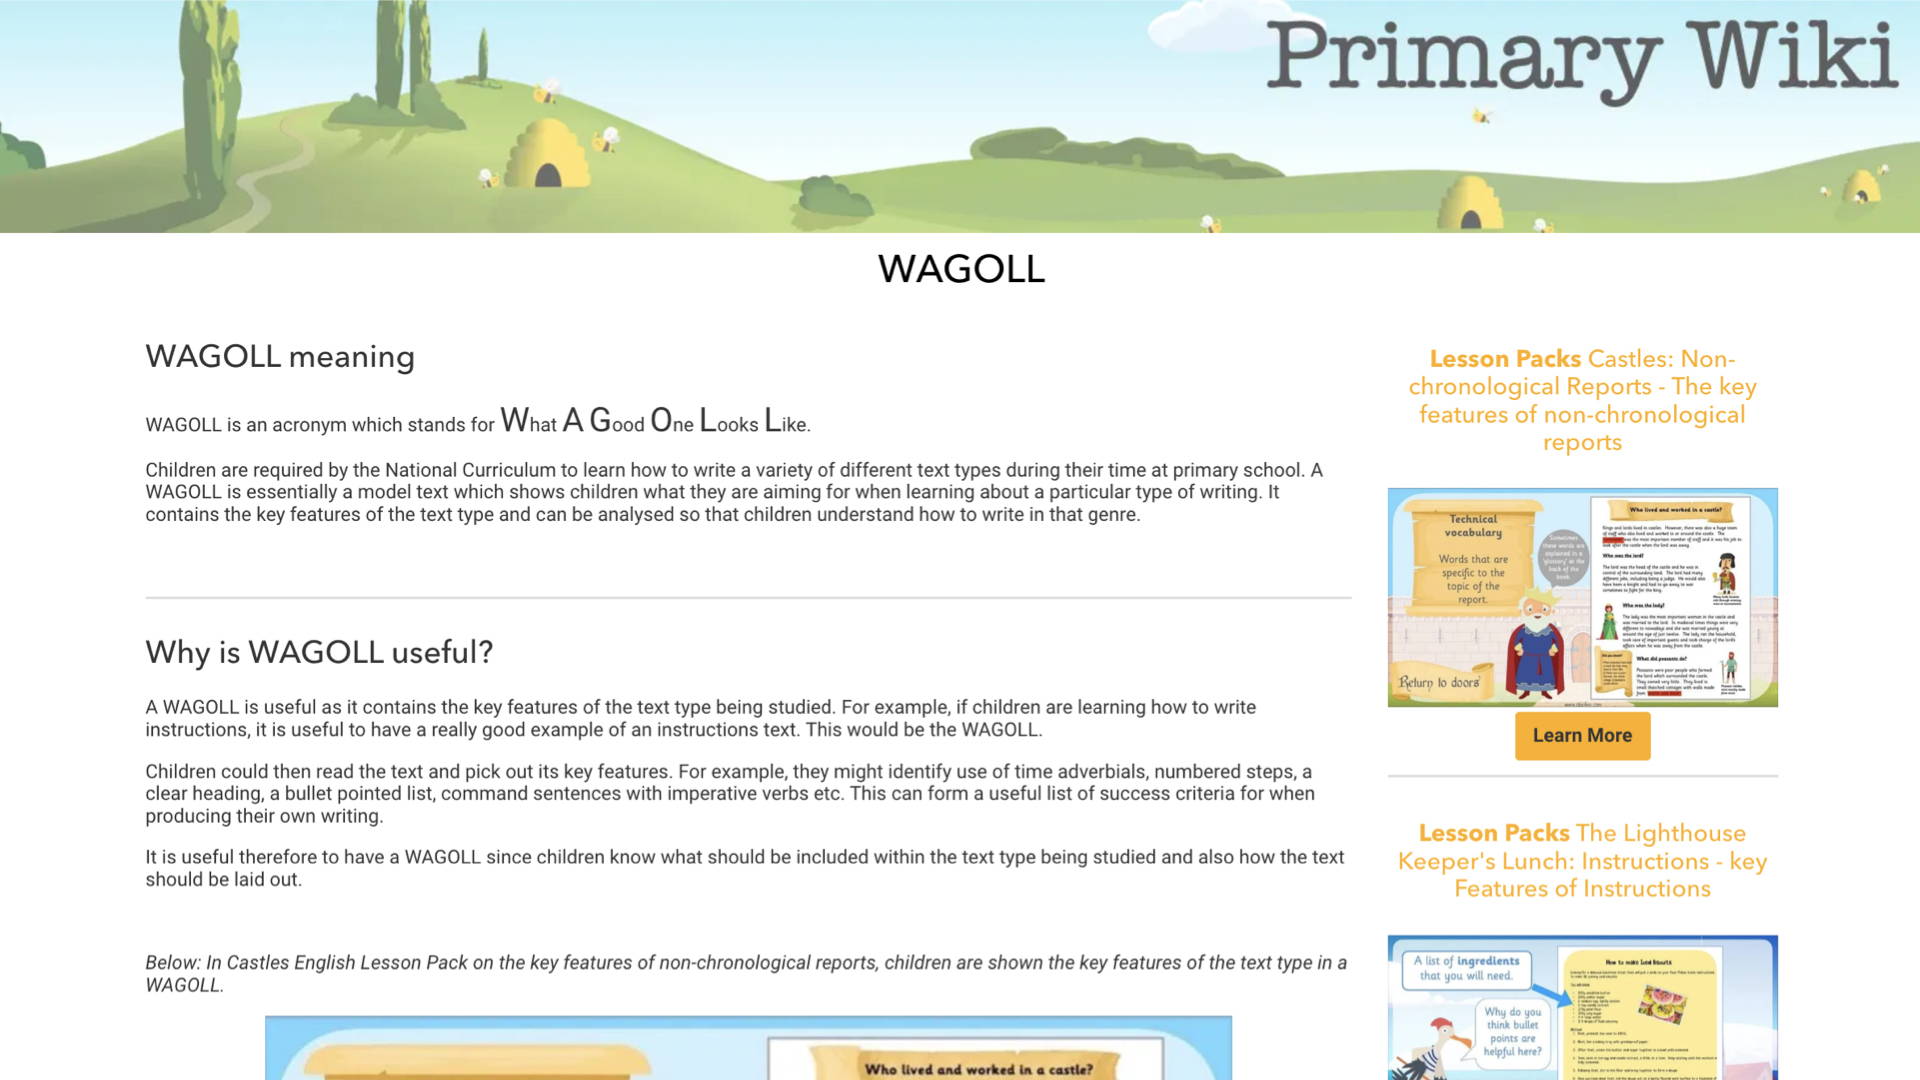 Learn more about WAGOLL with this wiki page